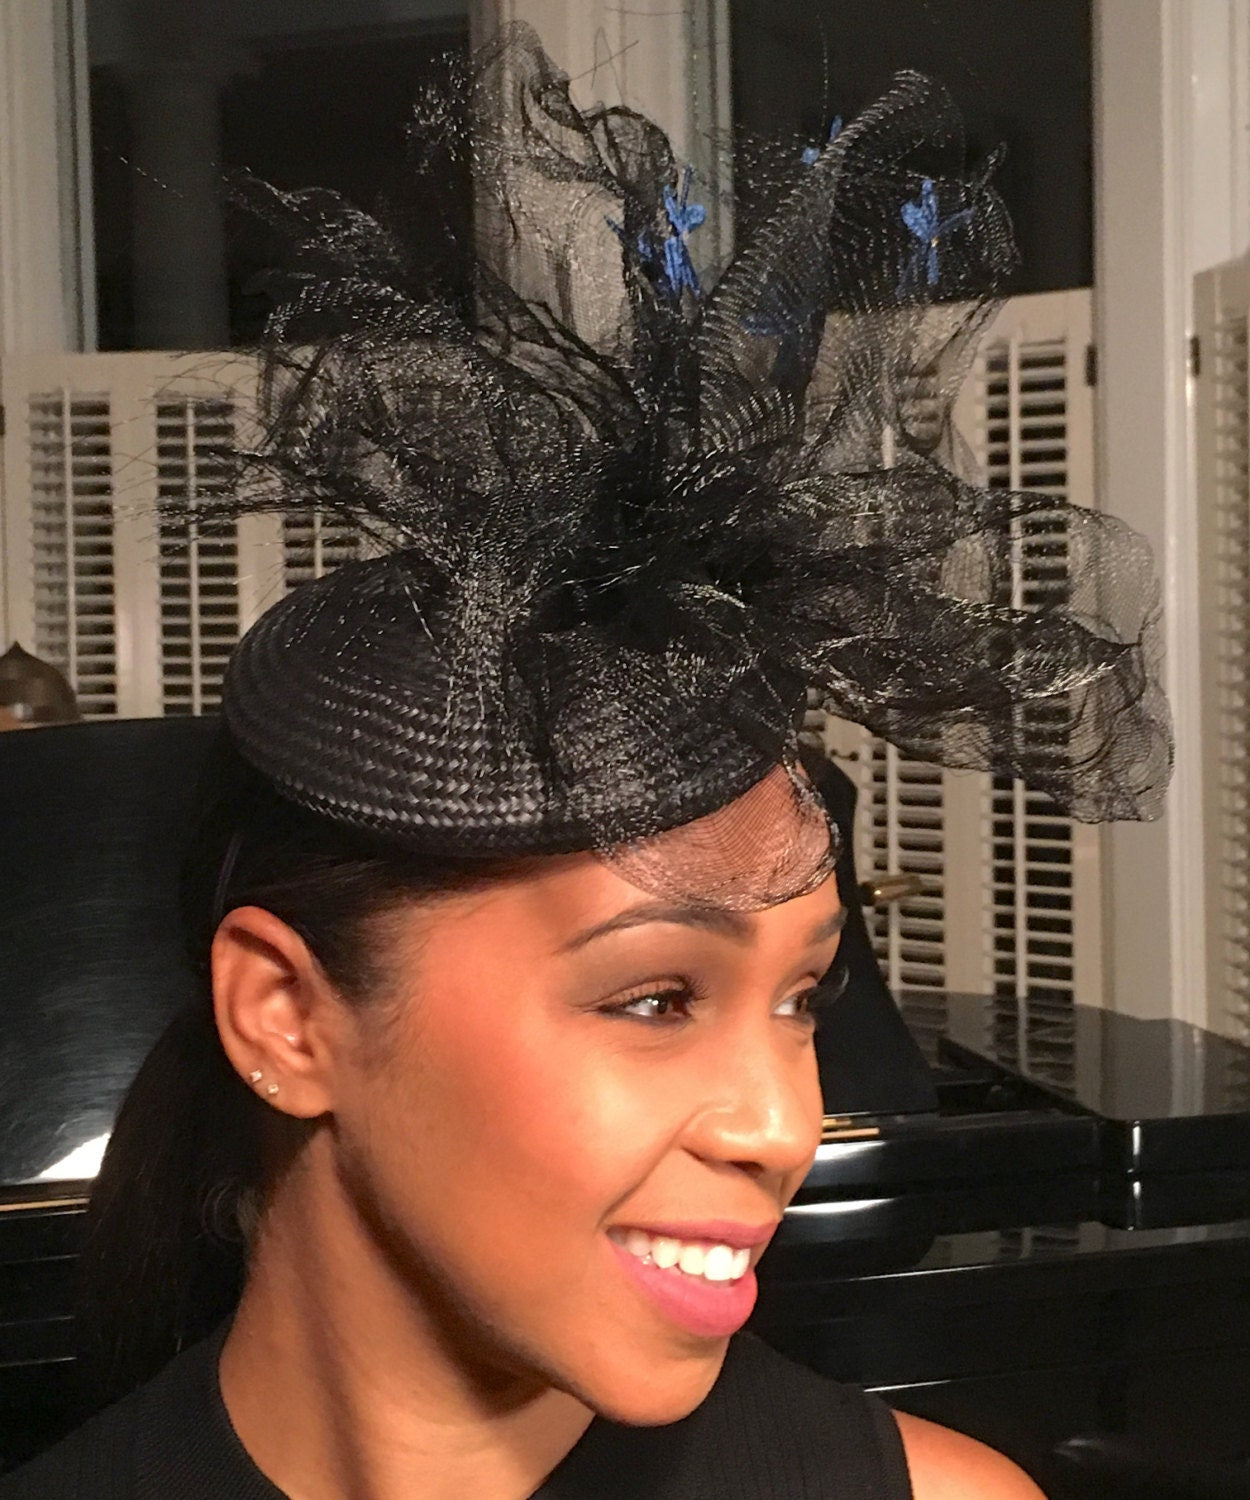 Black Straw Fascinator with Black Crinoline and Royal Blue Appliqué Flowers-Royal Ascot Races-Kentucky Derby Races-Cocktail Hat-Church Hat